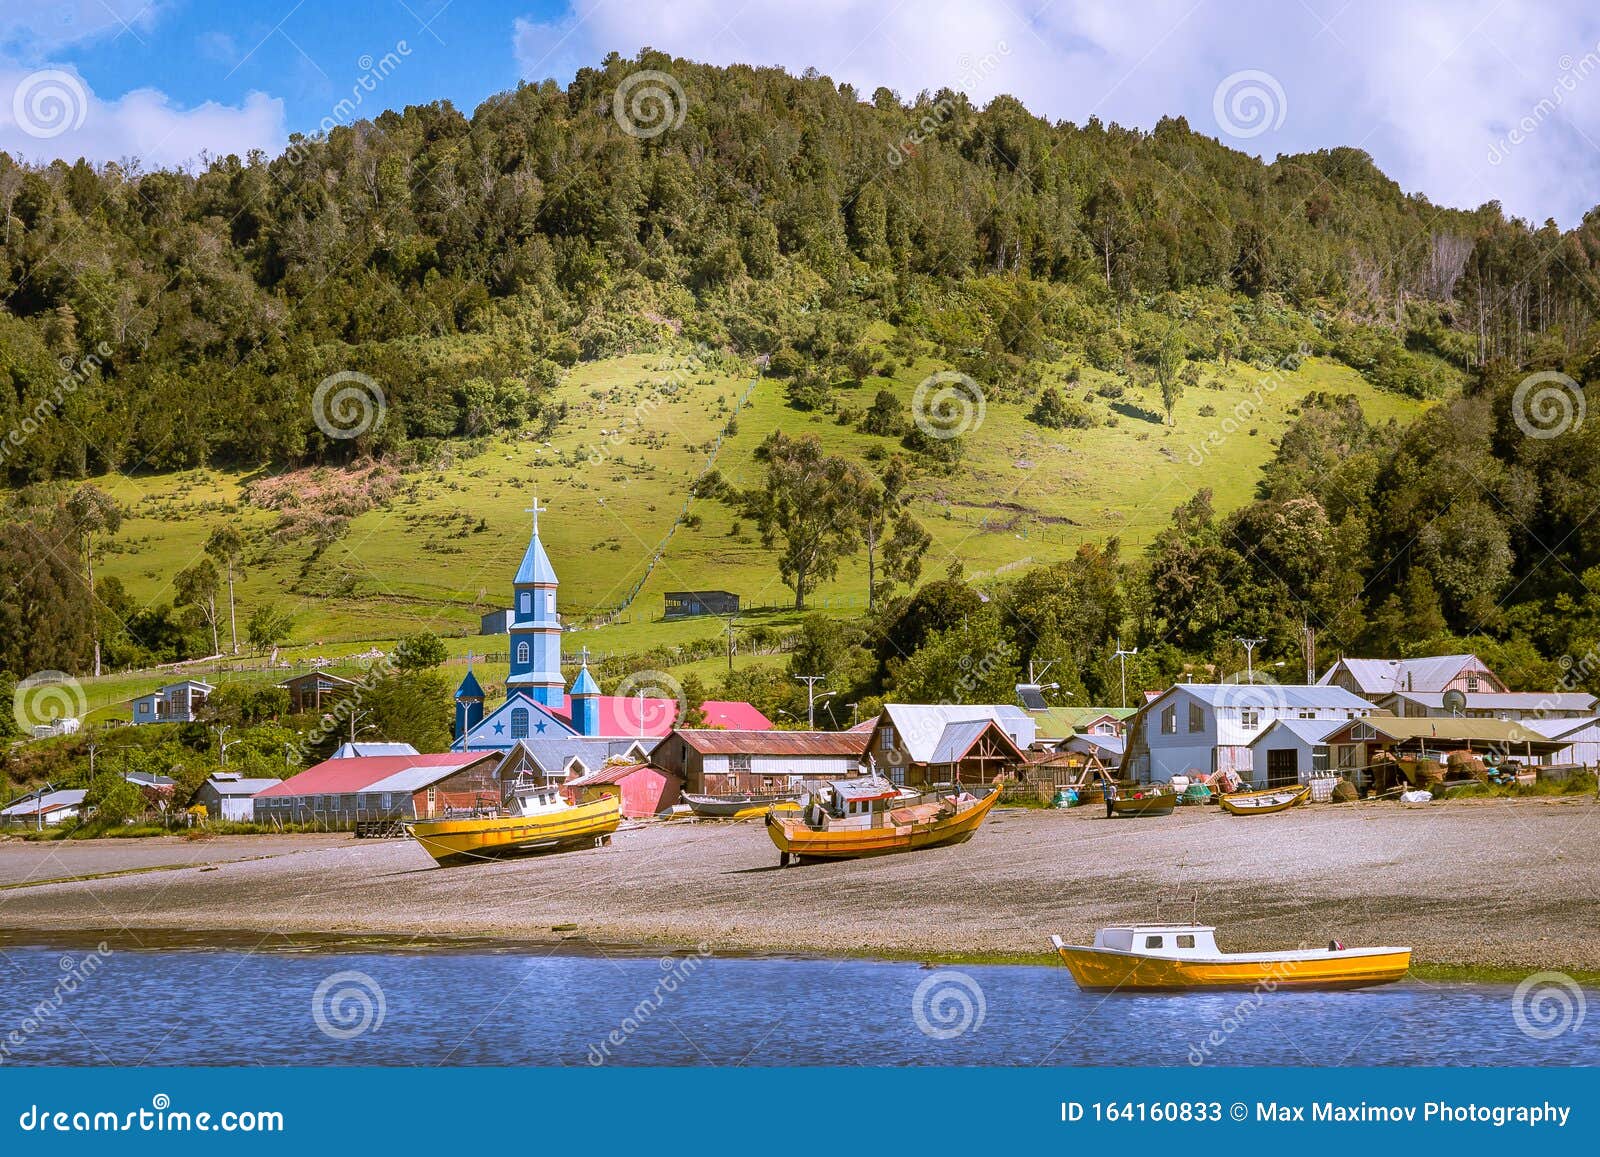 tenaun, chiloe archipelago, chile - view of the town of tenaun and its wooden jesuit church